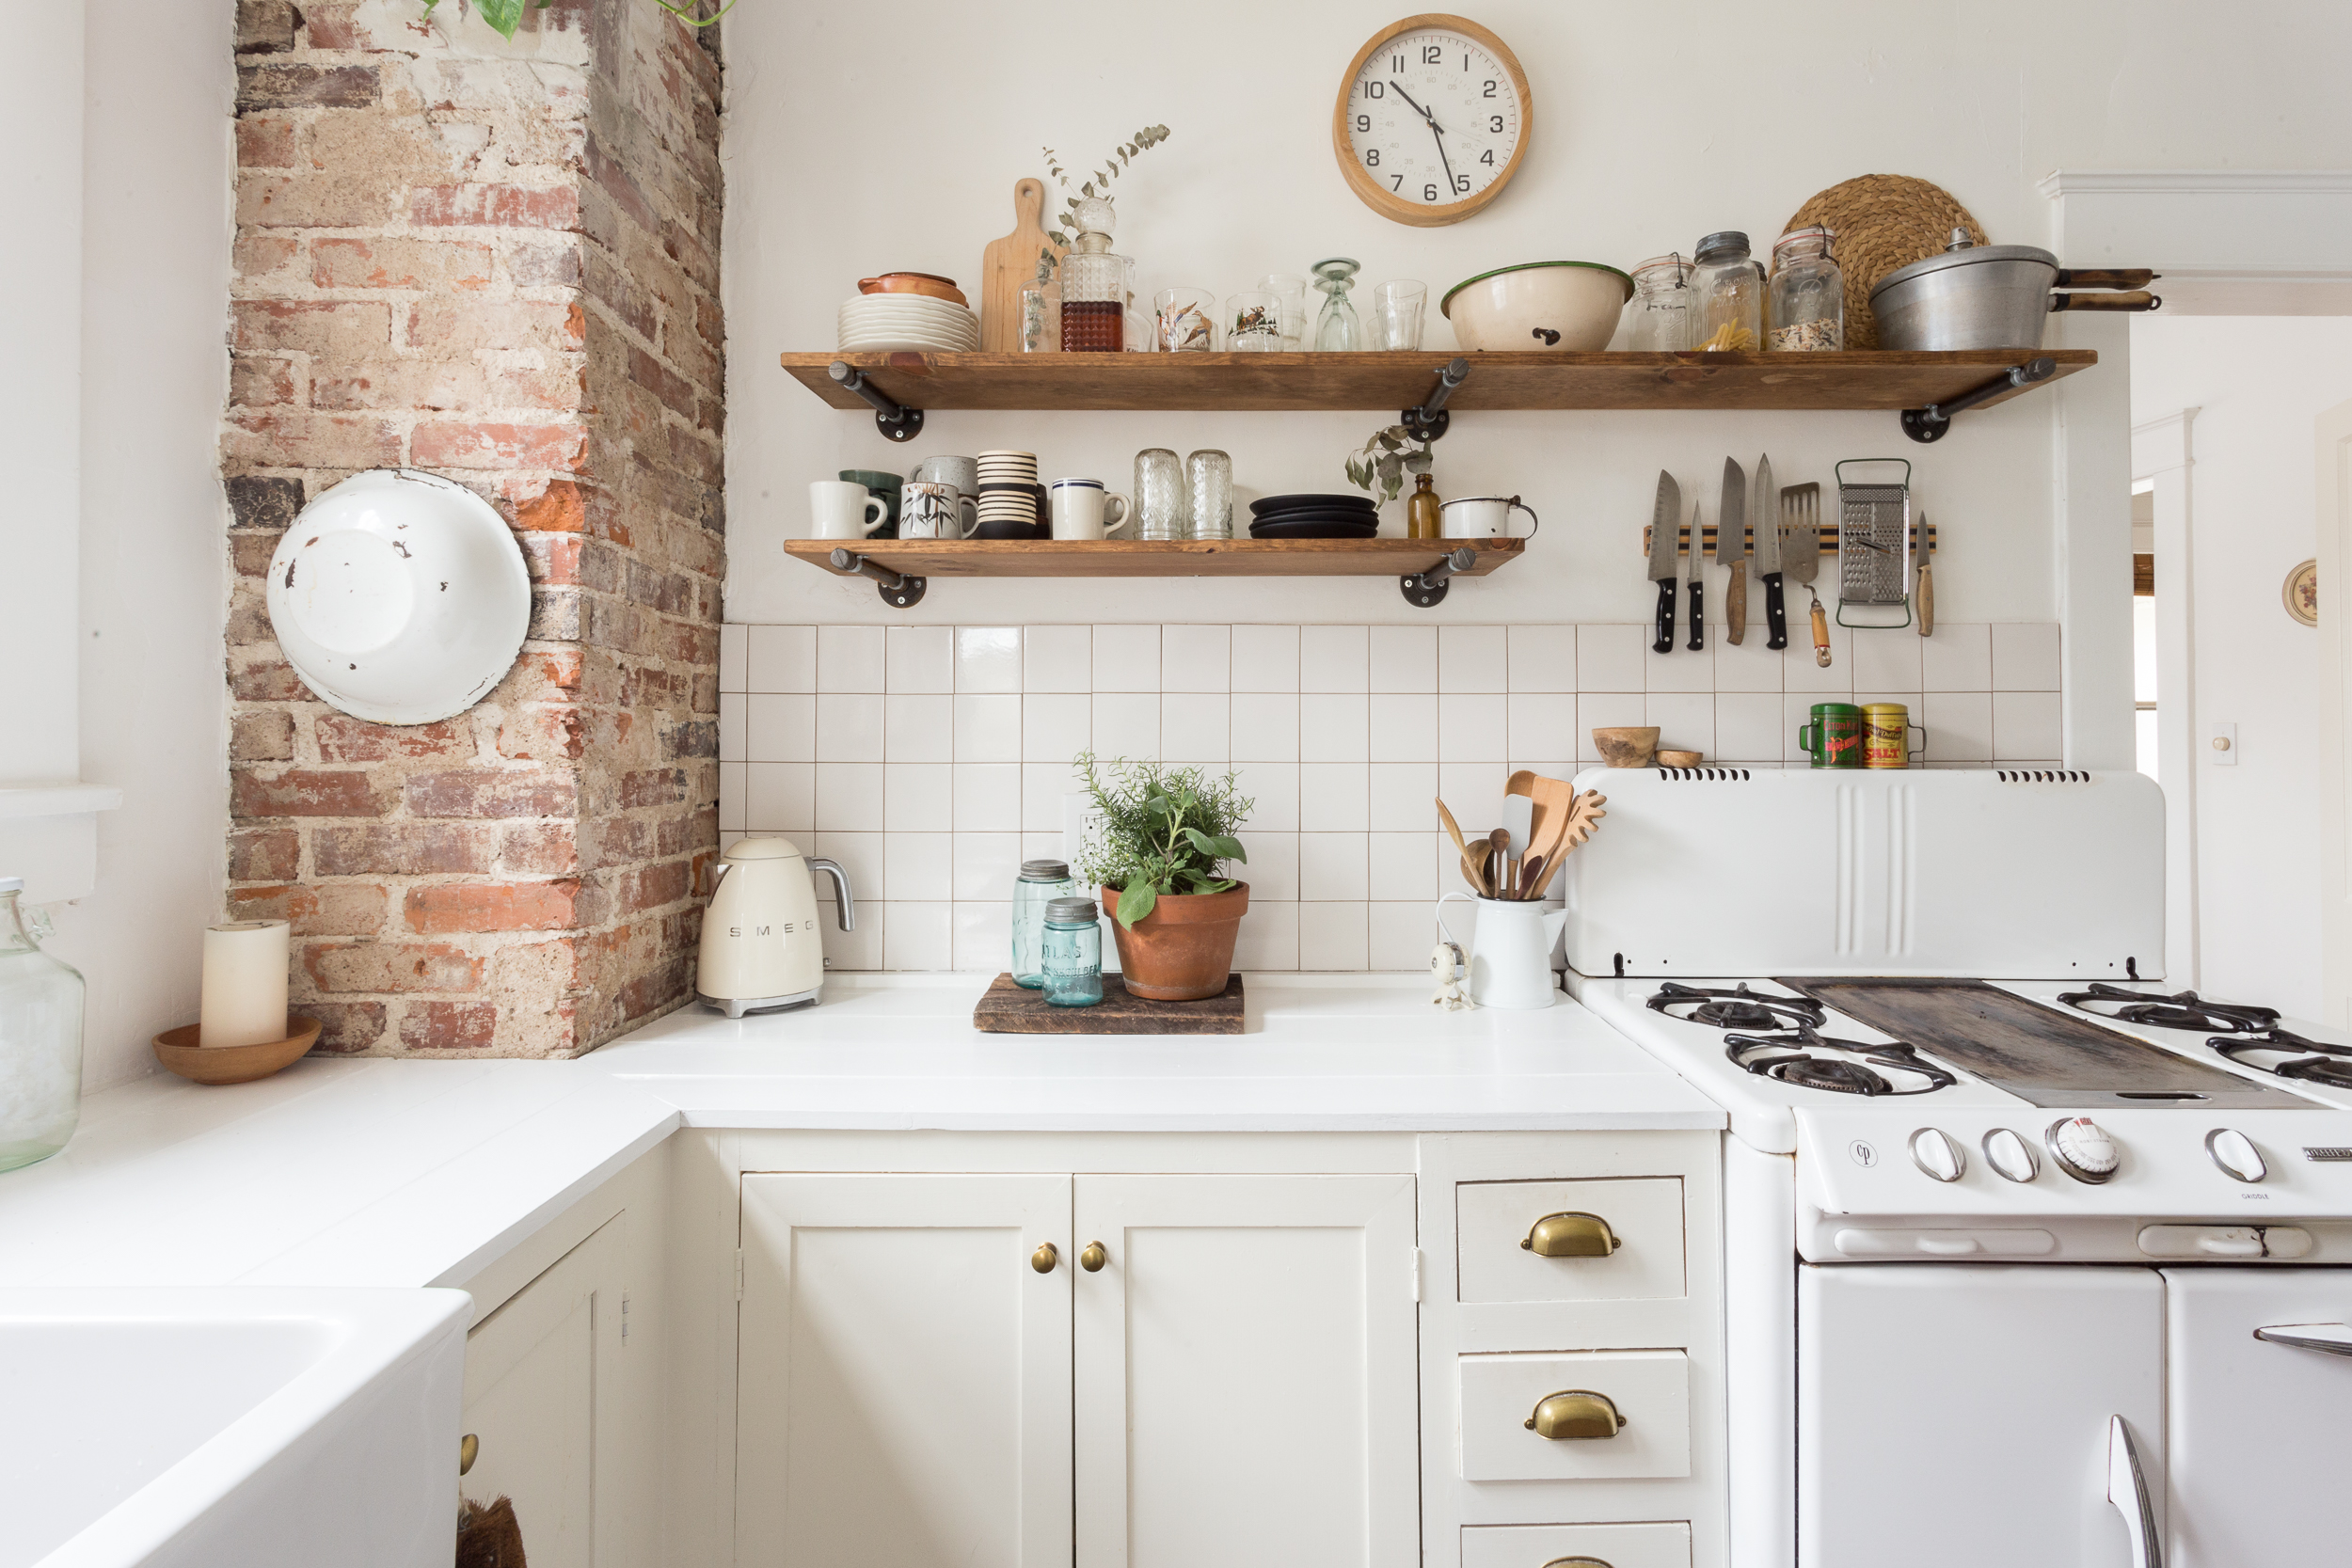 Cozy kitchen interior with utensils and exposed brick.